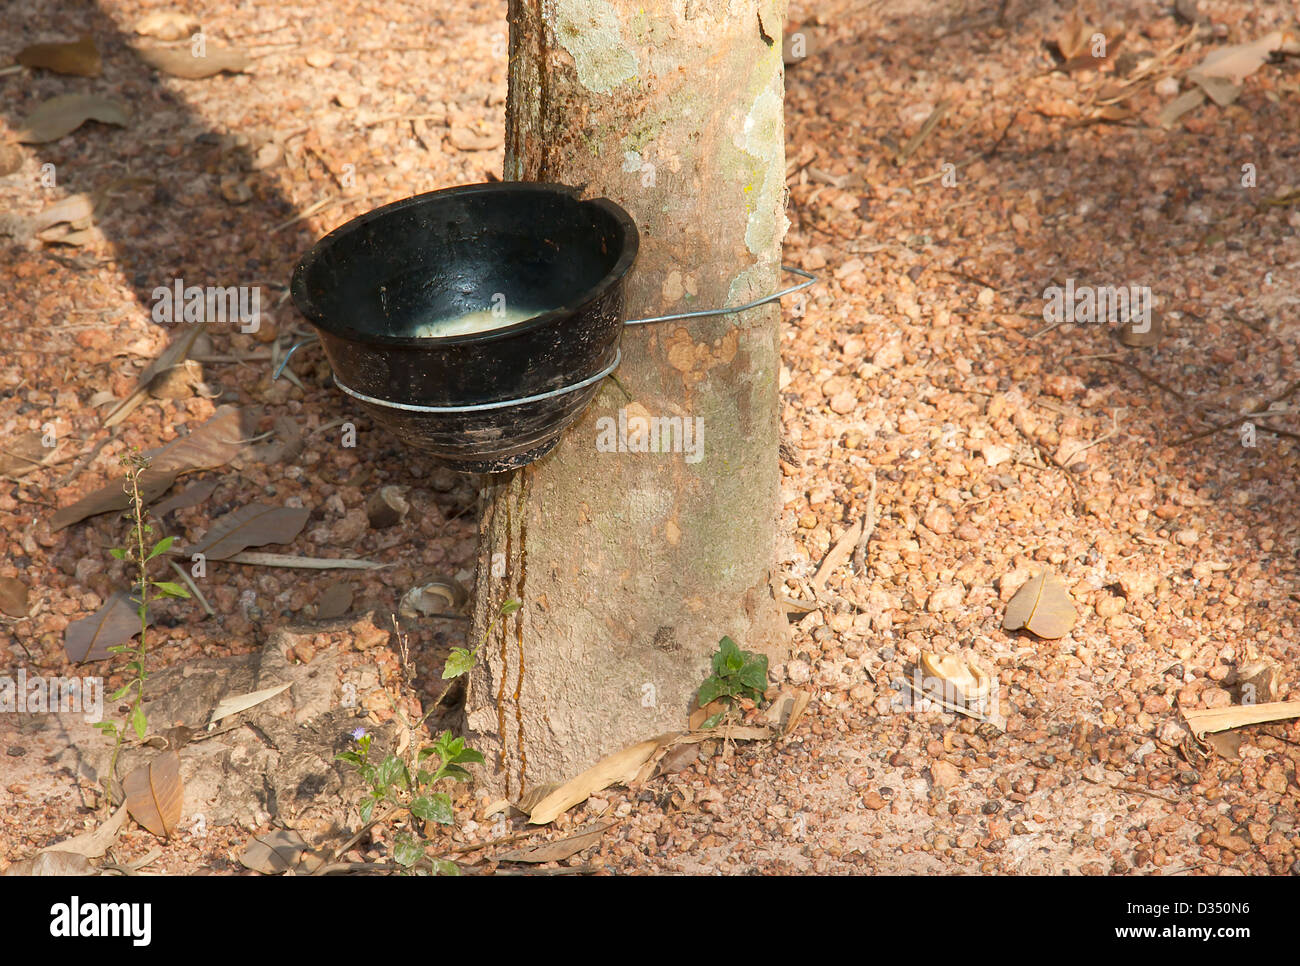 Plastic cup with handle black latex from rubber trees. Stock Photo